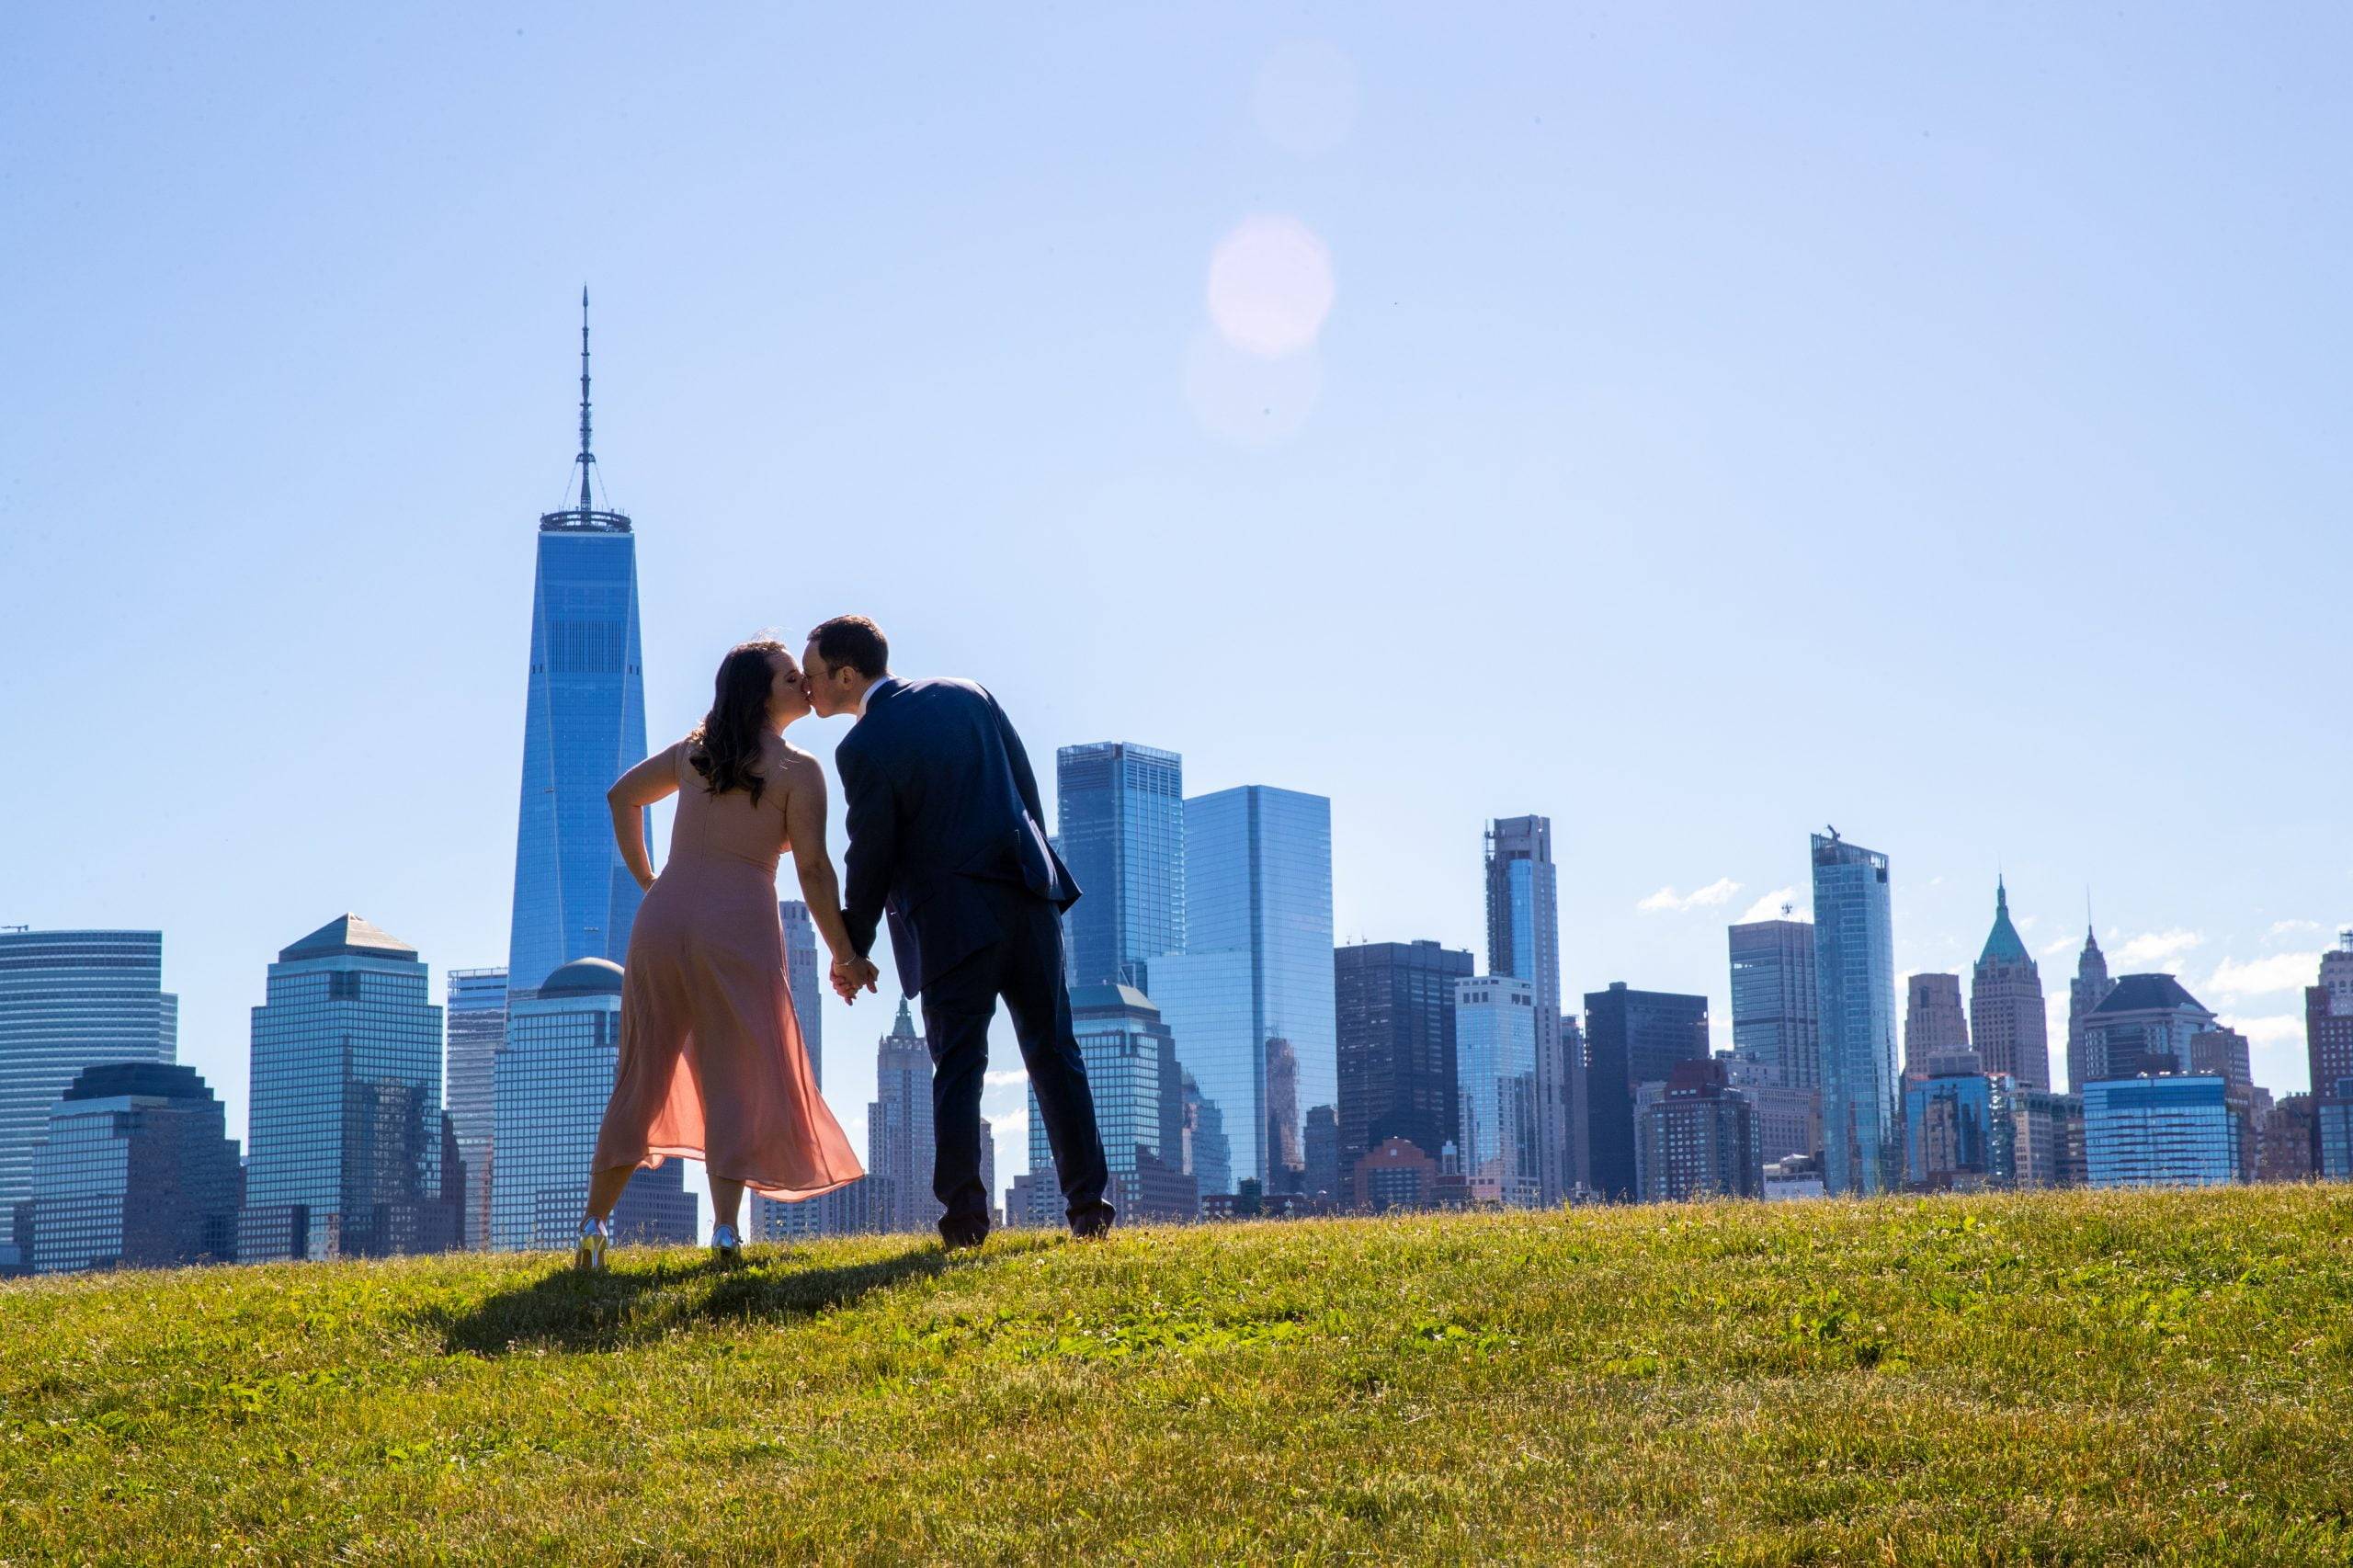 A couple kisses in front of a city skyline.